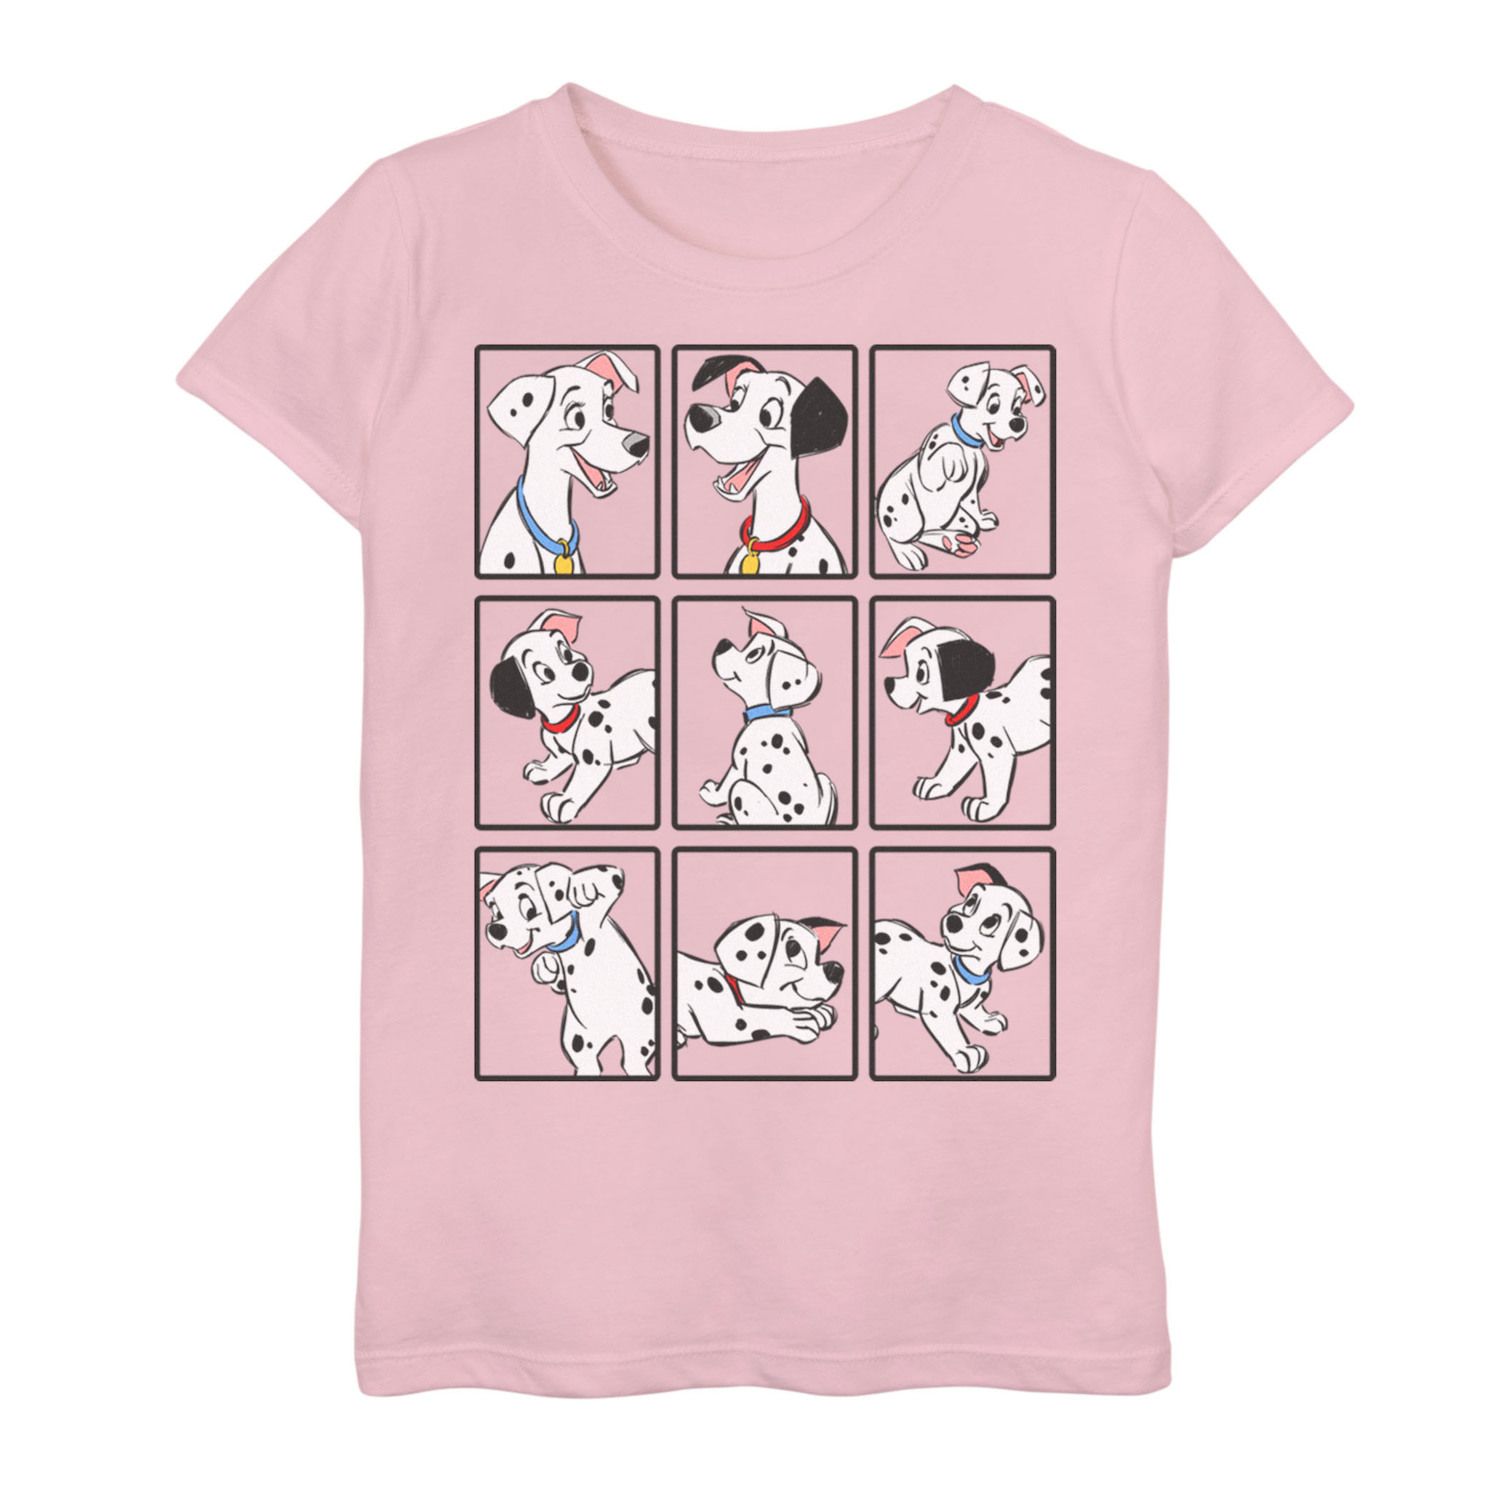 Image for Disney 's 101 Dalmatians Girls 7-16 Family Photo Box Up Graphic Tee at Kohl's.